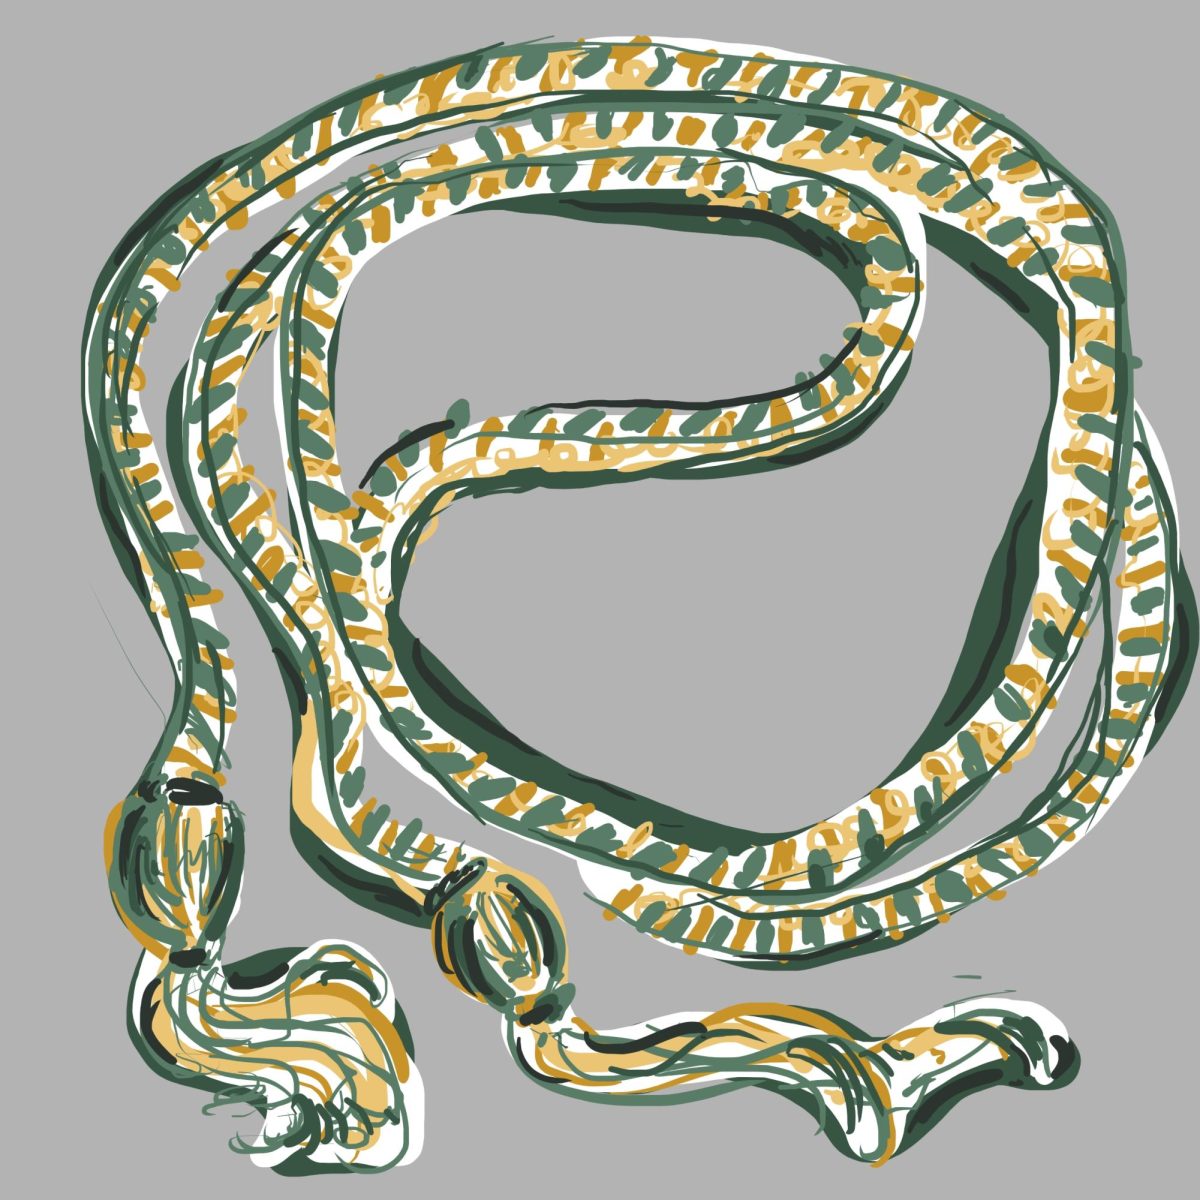 Graduation cord in Shorecrest colors. Illustration by Harper Nelson-Wooley.